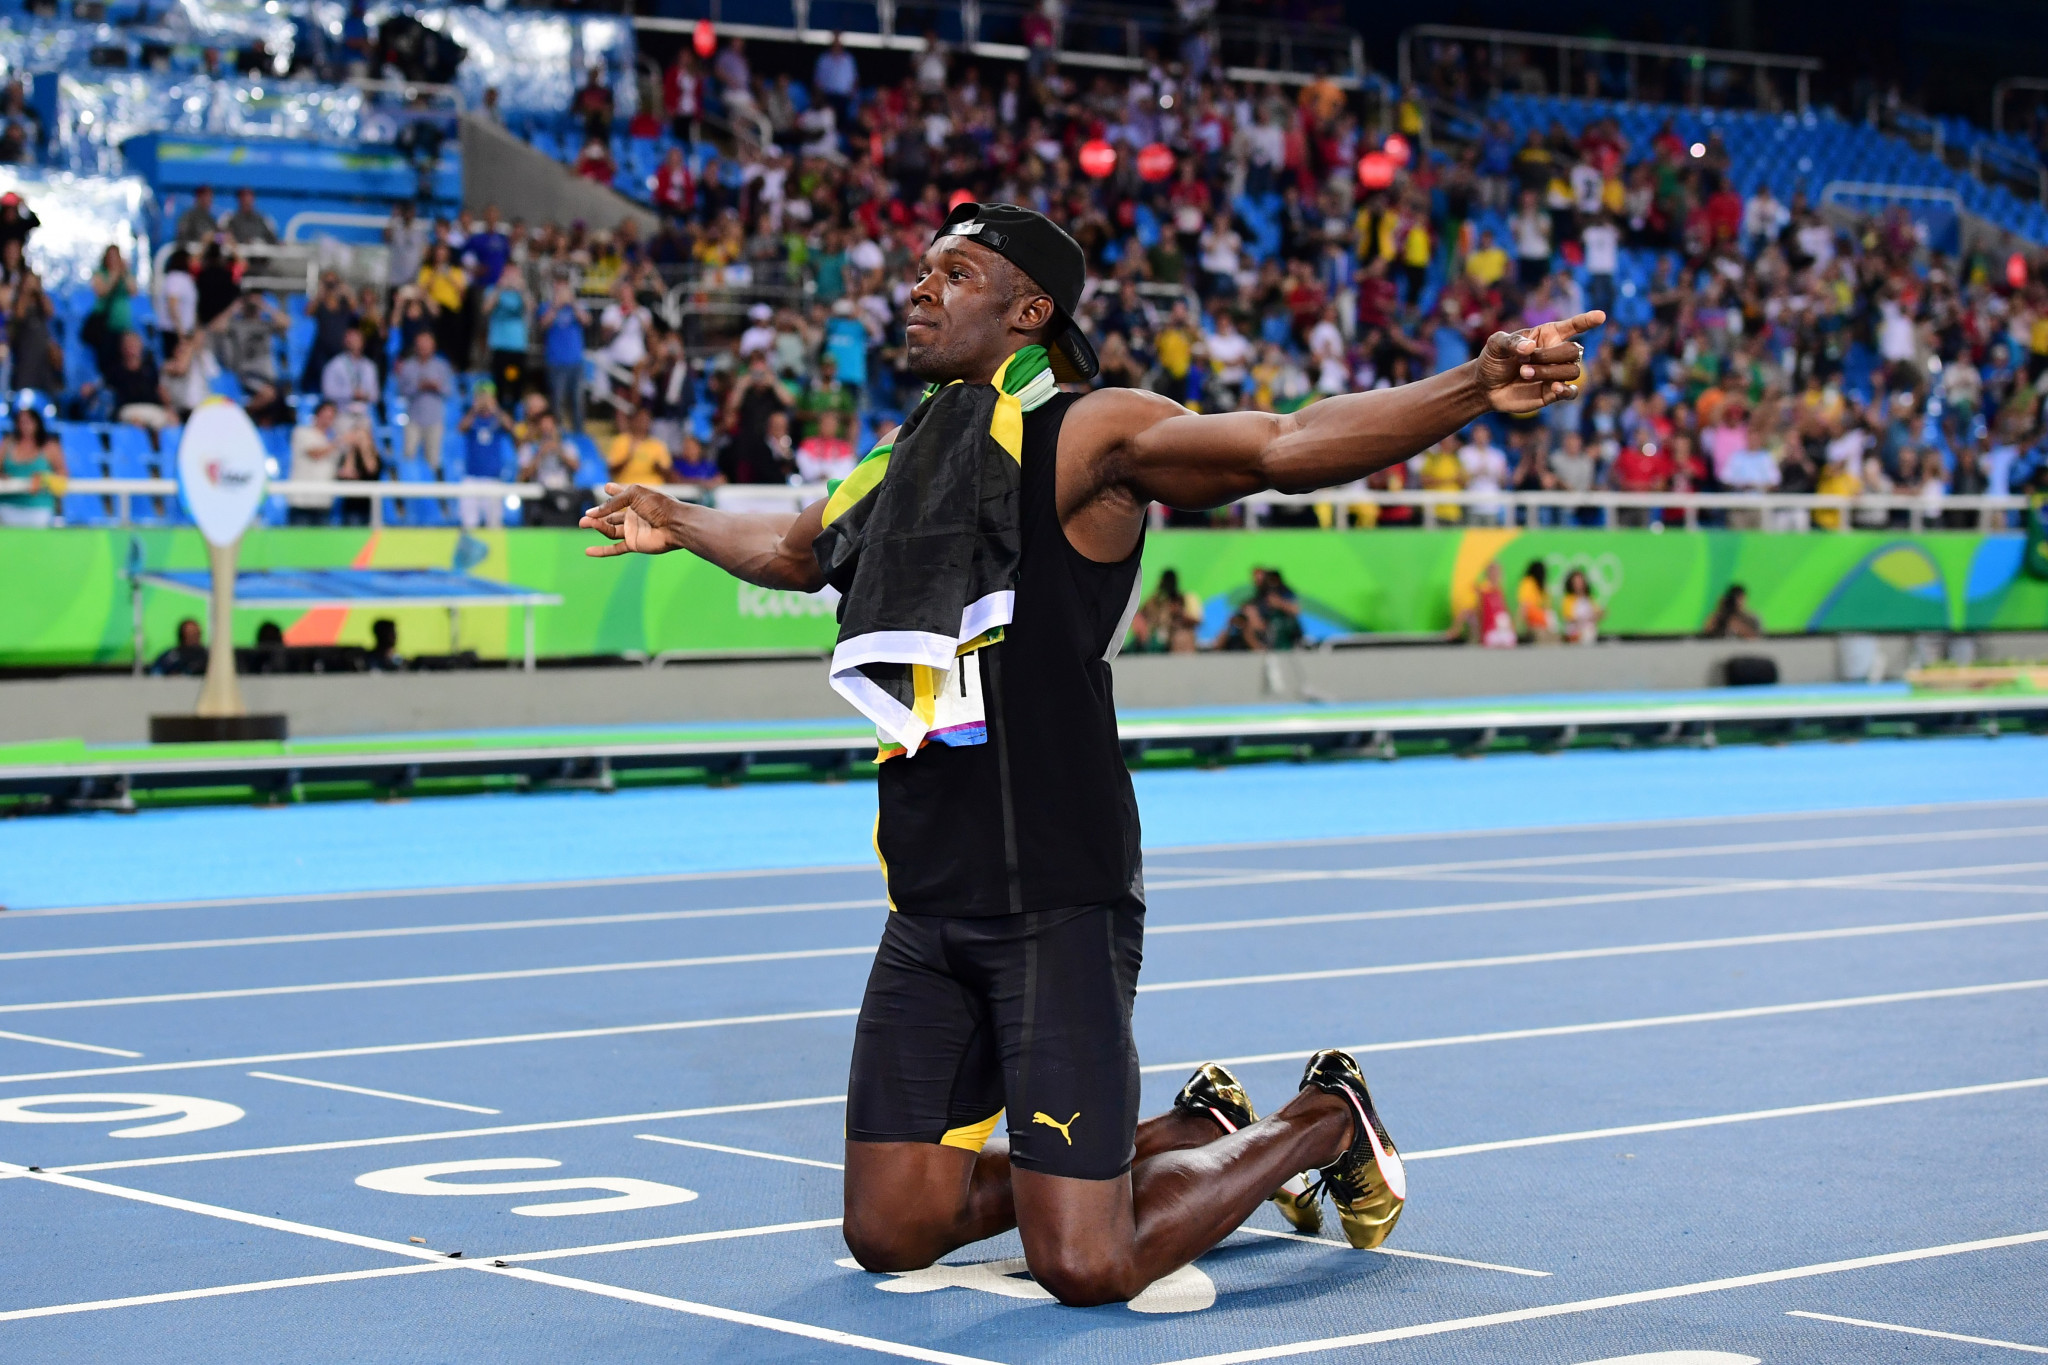 Jamaica's Usain Bolt celebrates his team's victory at the end of the Men's 4x100m Relay Final during the athletics event at the Rio 2016 Olympic Games at the Olympic Stadium in Rio de Janeiro ©Getty Images